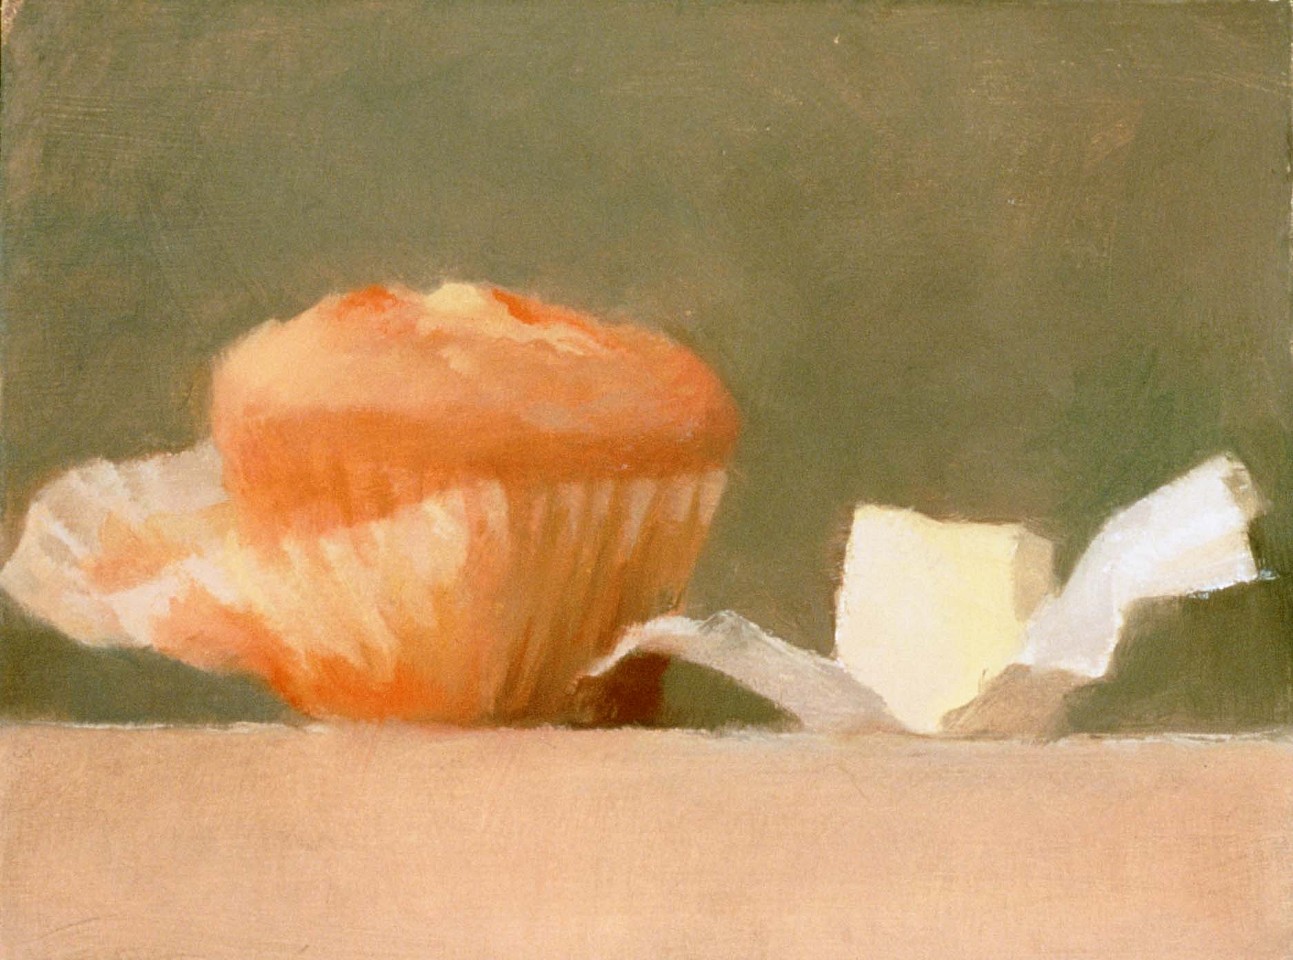 Tina Ingraham
Muffin & Butter, 1997
oil on muslin panel, 5 x 7 1/2 in.